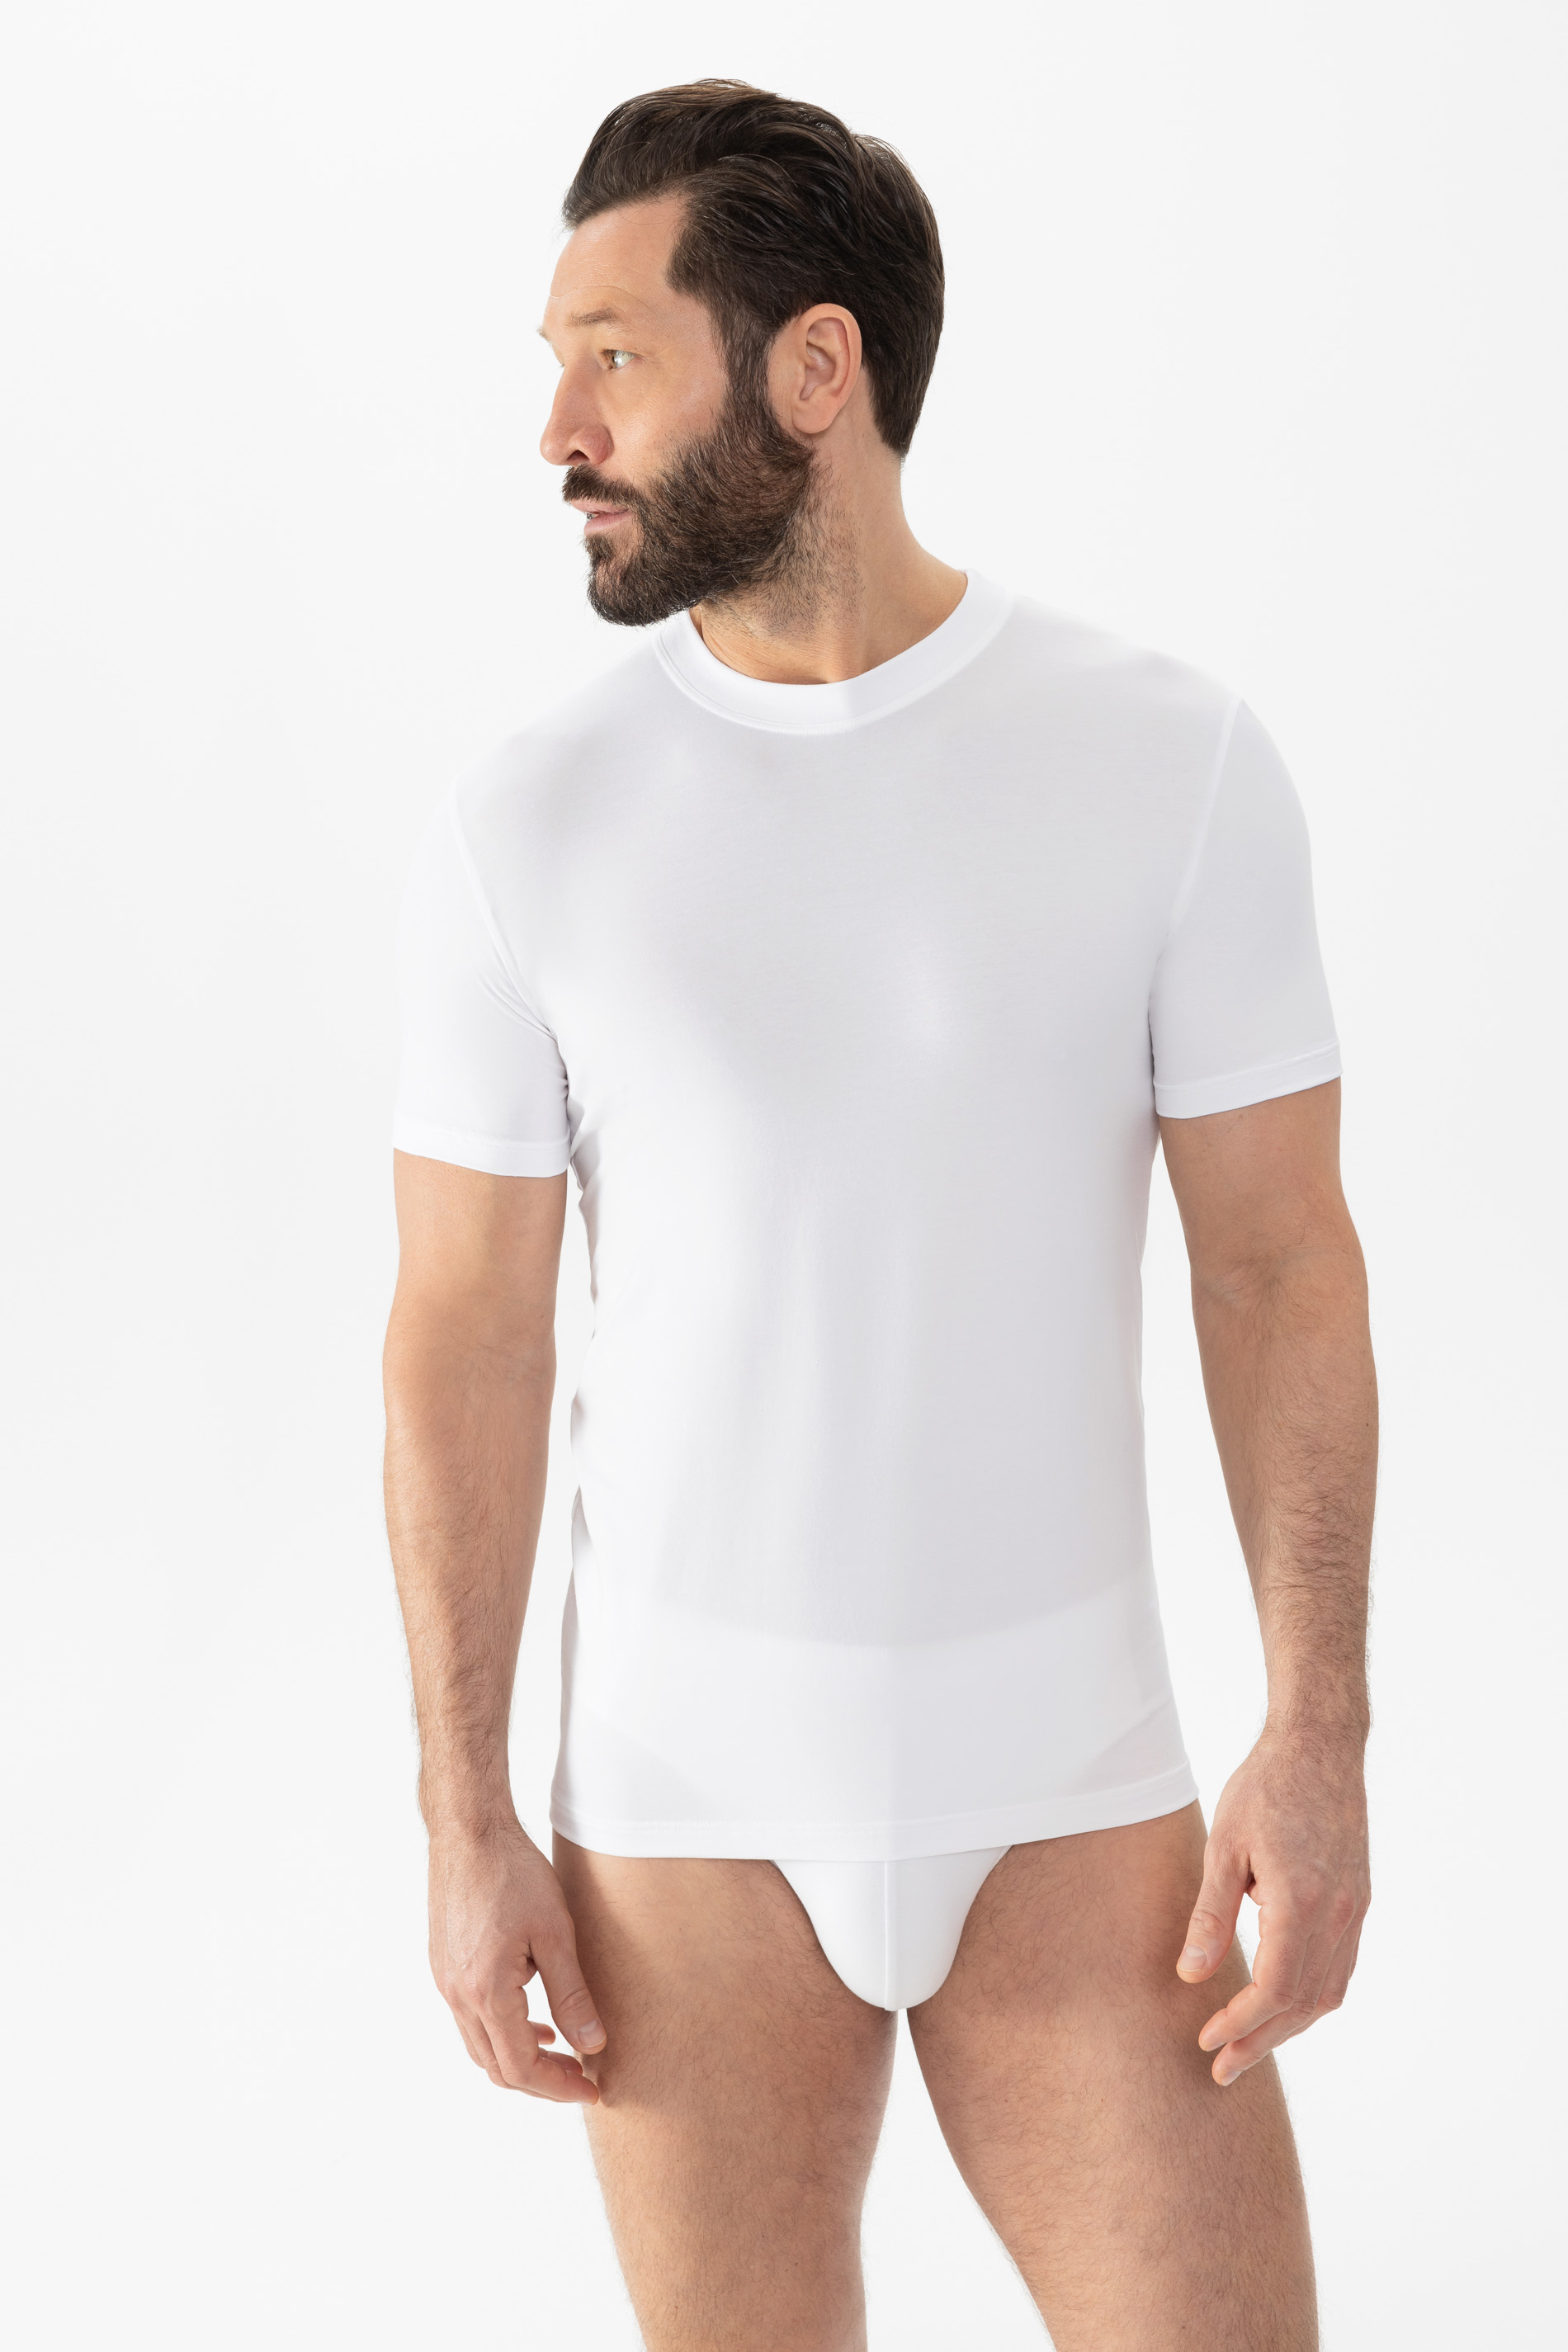 Olympic shirt White Serie Dry Cotton Front View | mey®